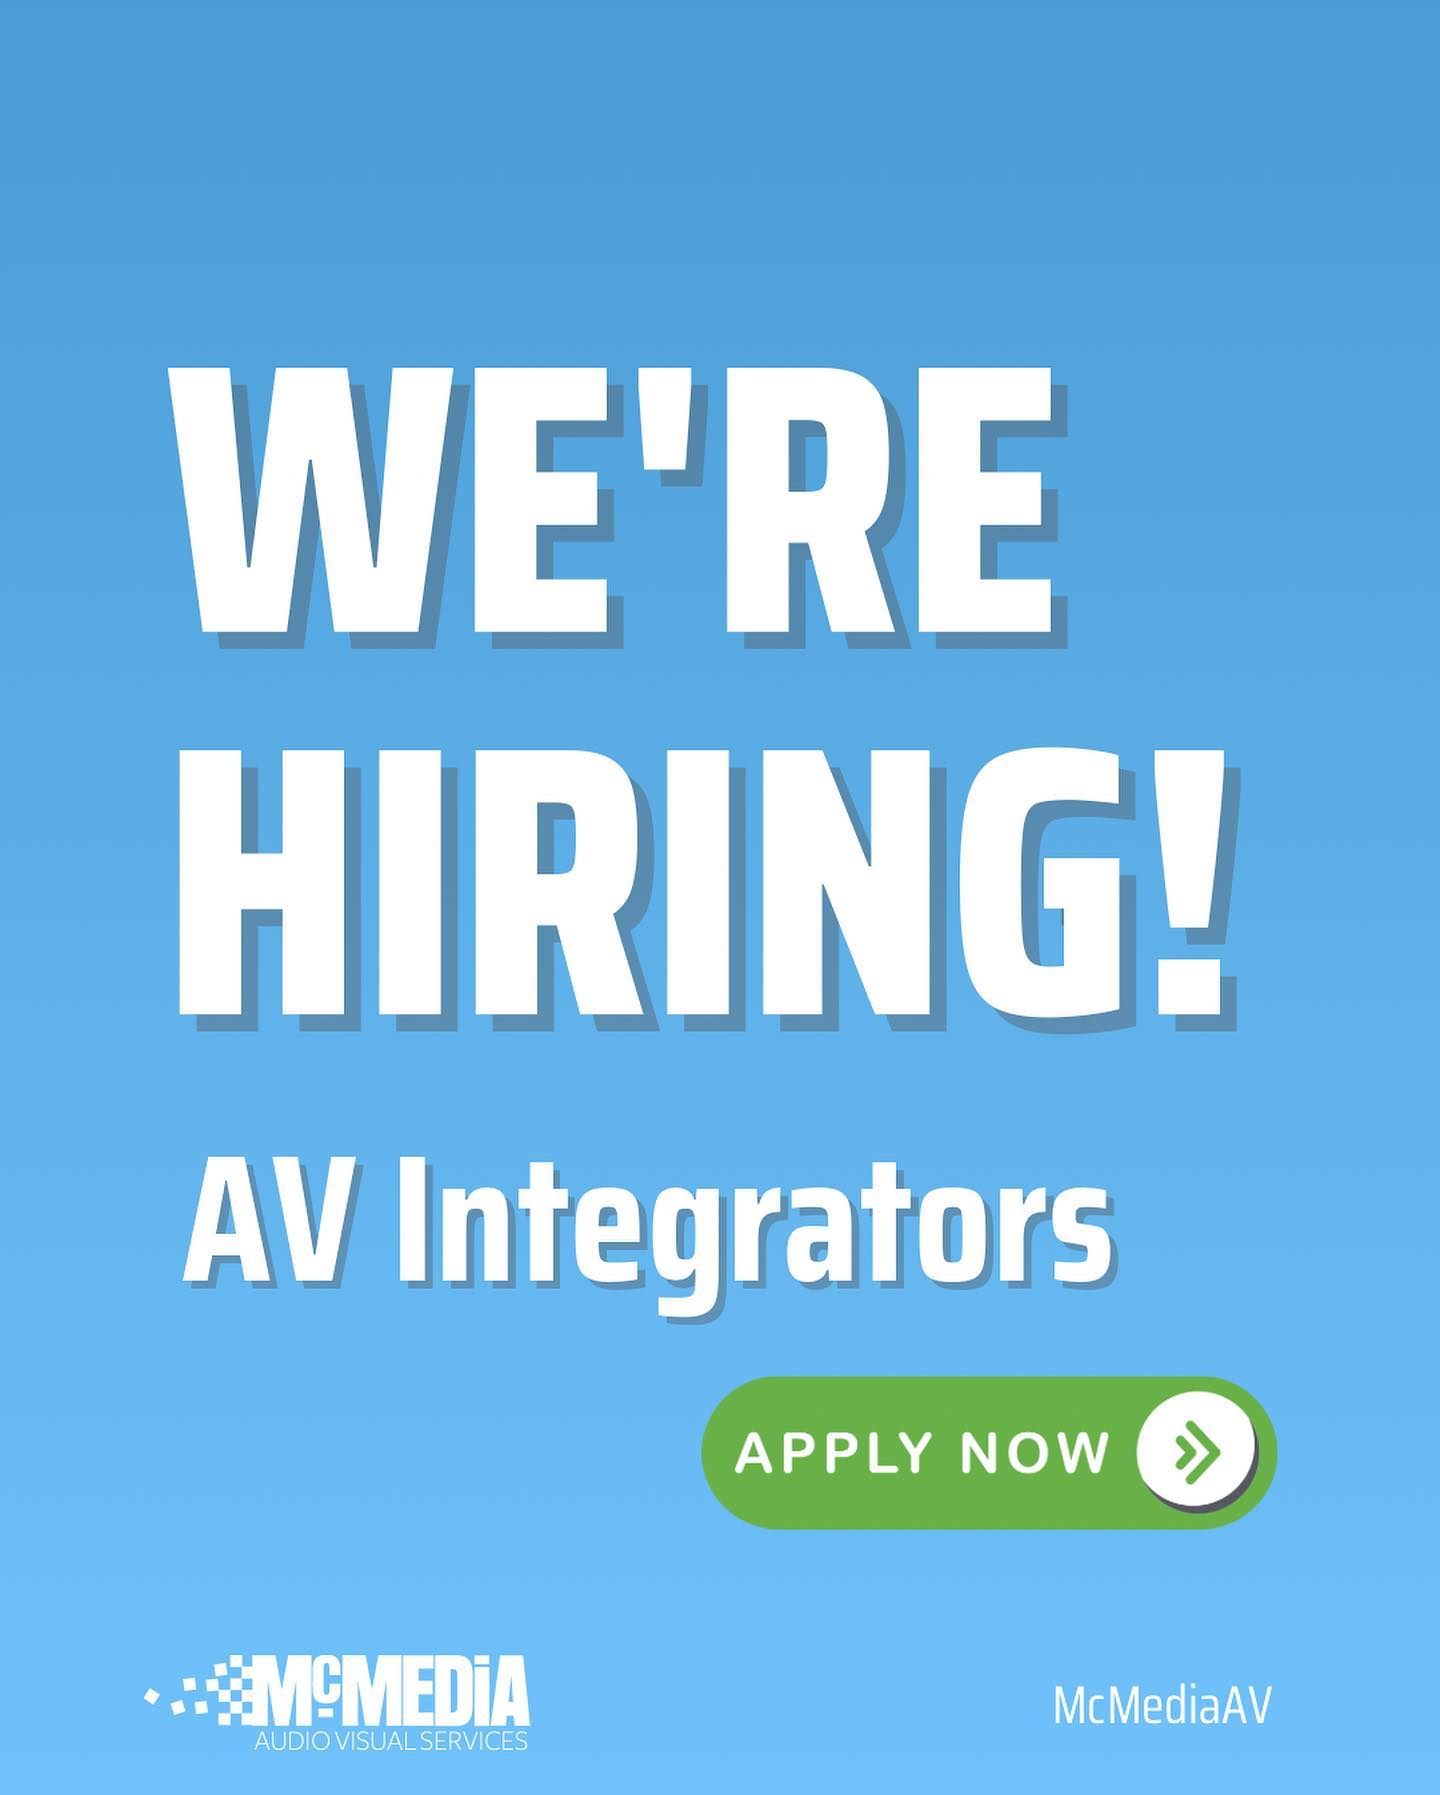 Are you passionate about audio, screens and everything else AV? Then we want to hear from you! We’re looking for self-motivated, dynamic, and positive individuals with a background in AV. As our Audio Visual Integrator, you’ll be responsible for installing, troubleshooting, and calibrating AV equipment with style. You’ll ensure everything is up to spec and…